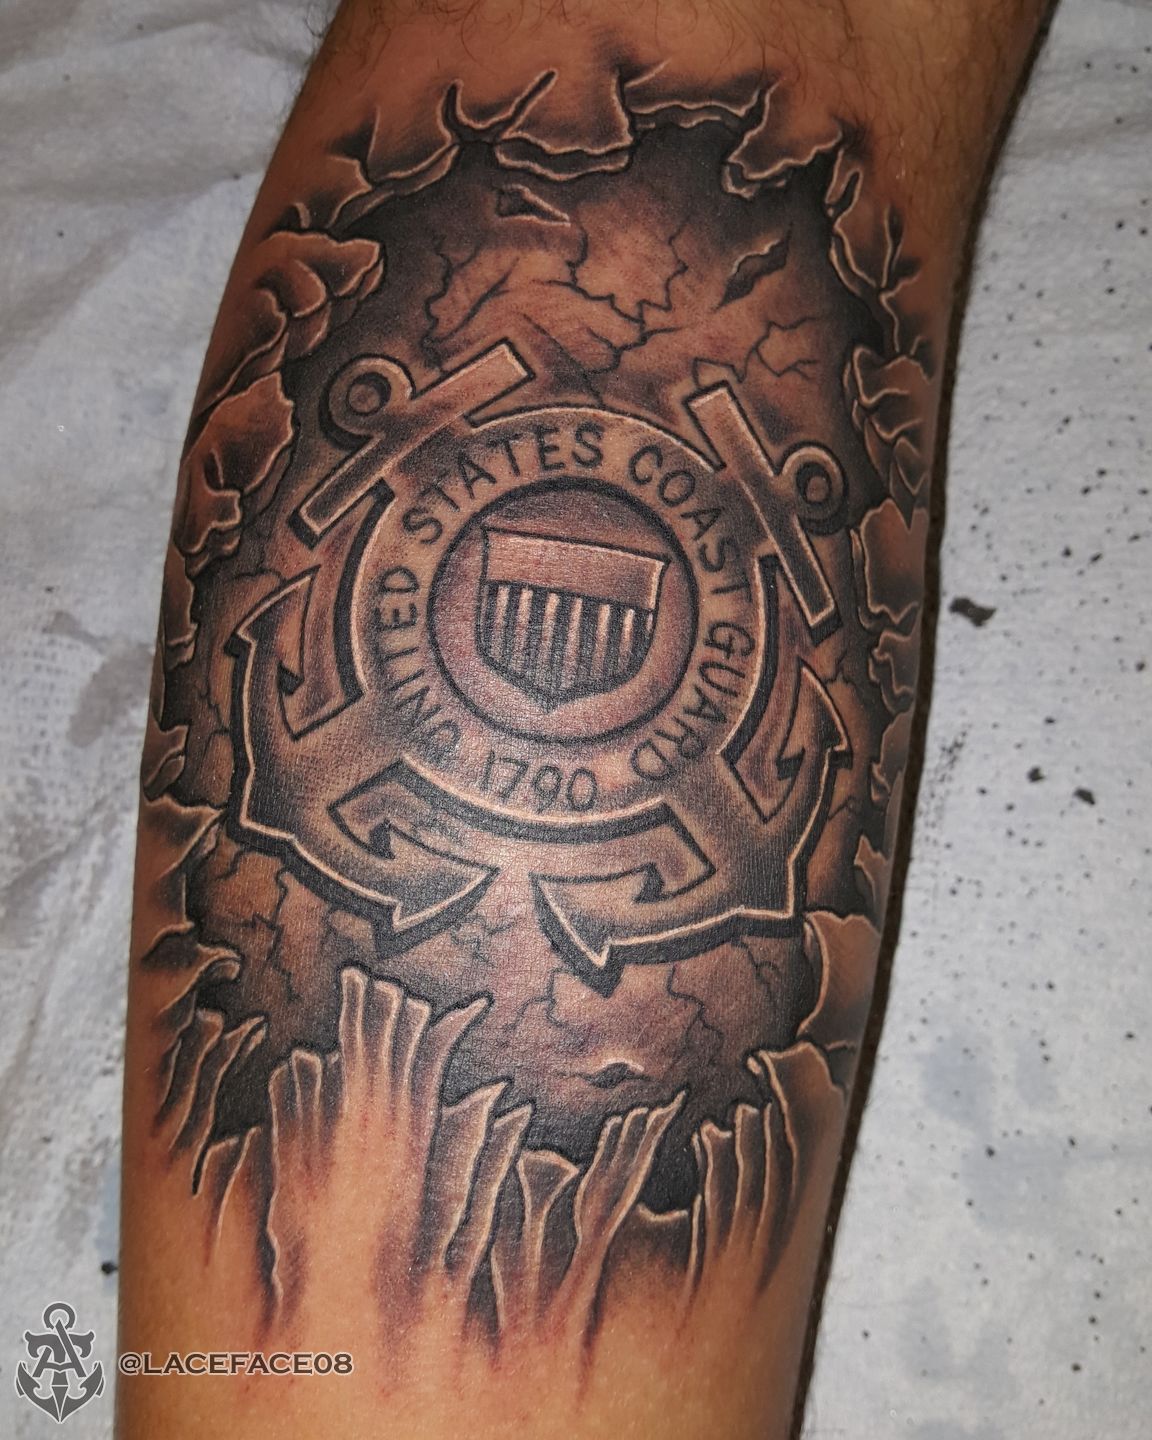 US Coast Guard eases tattoo restrictions to draw new recruits  FOX8 WGHP